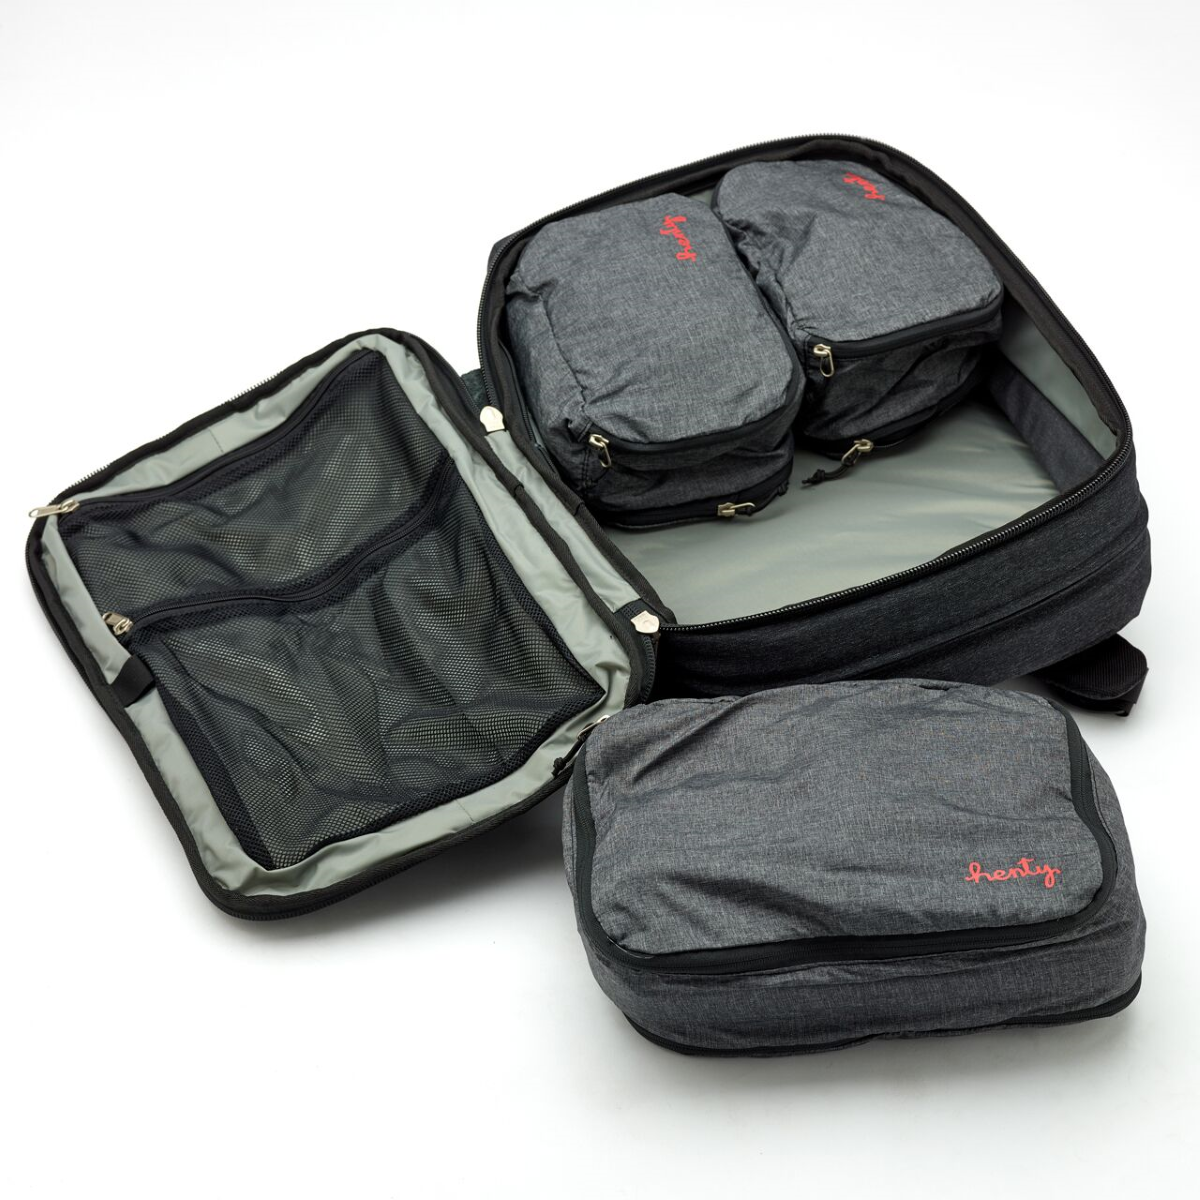 Travel Backpack -The Henty Travel Brief is Now Available on Kickstarter